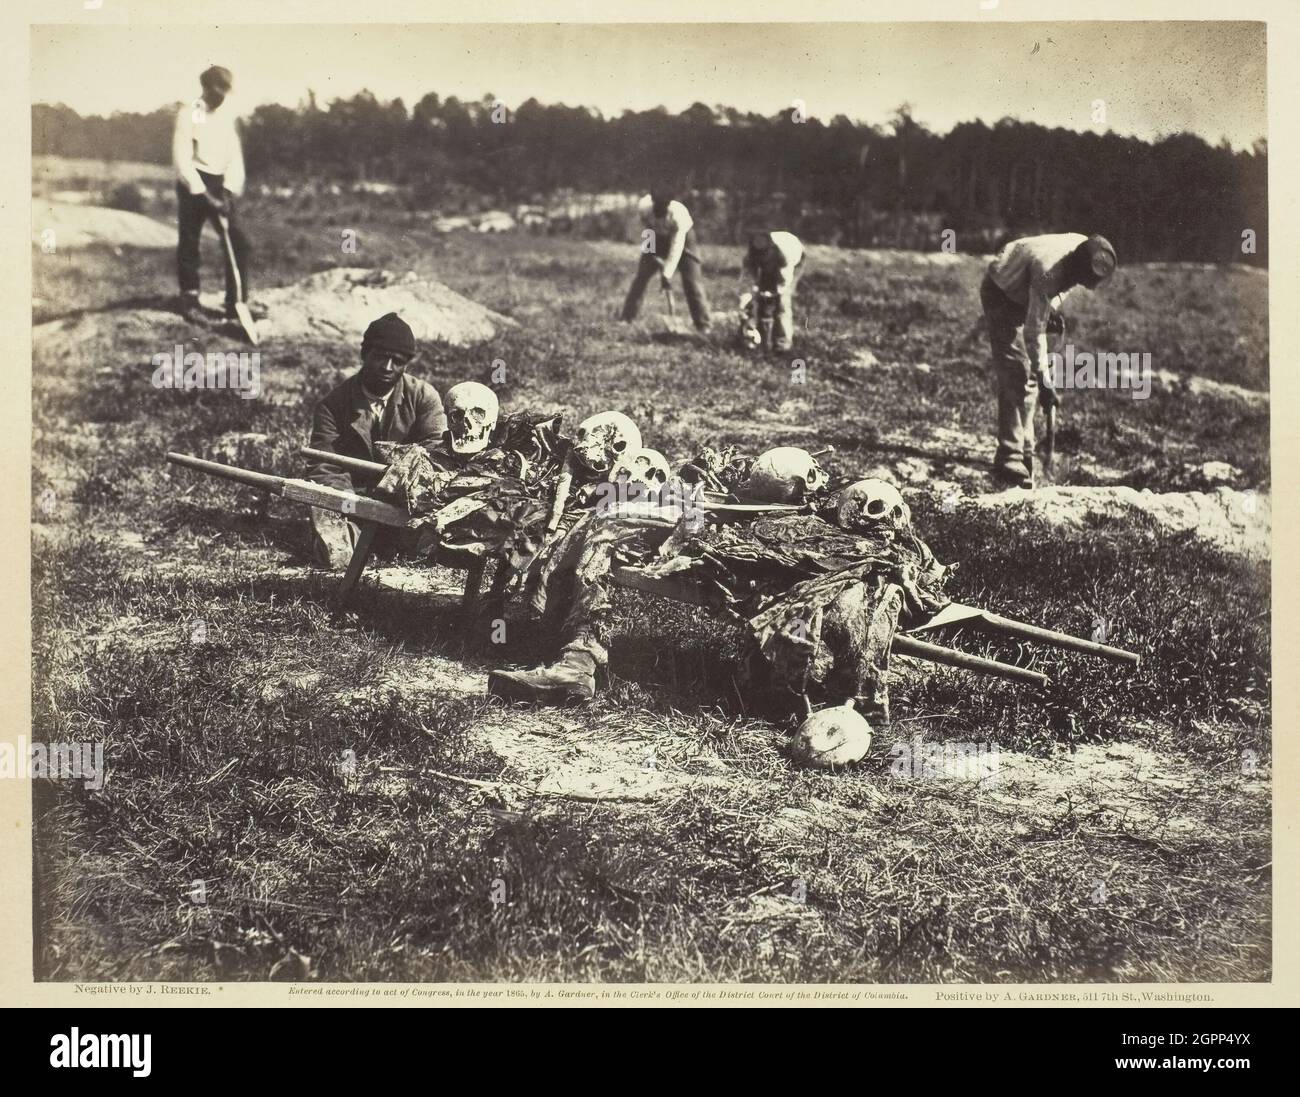 A Burial Party, Cold Harbor, Virginia, April 1865. [Scene from the American Civil War: gravediggers bury the remains of soldiers killed in battle]. Albumen print, pl. 94 from the album &quot;Gardner's Photographic Sketch Book of the War, volume ii&quot; (1866). Stock Photo